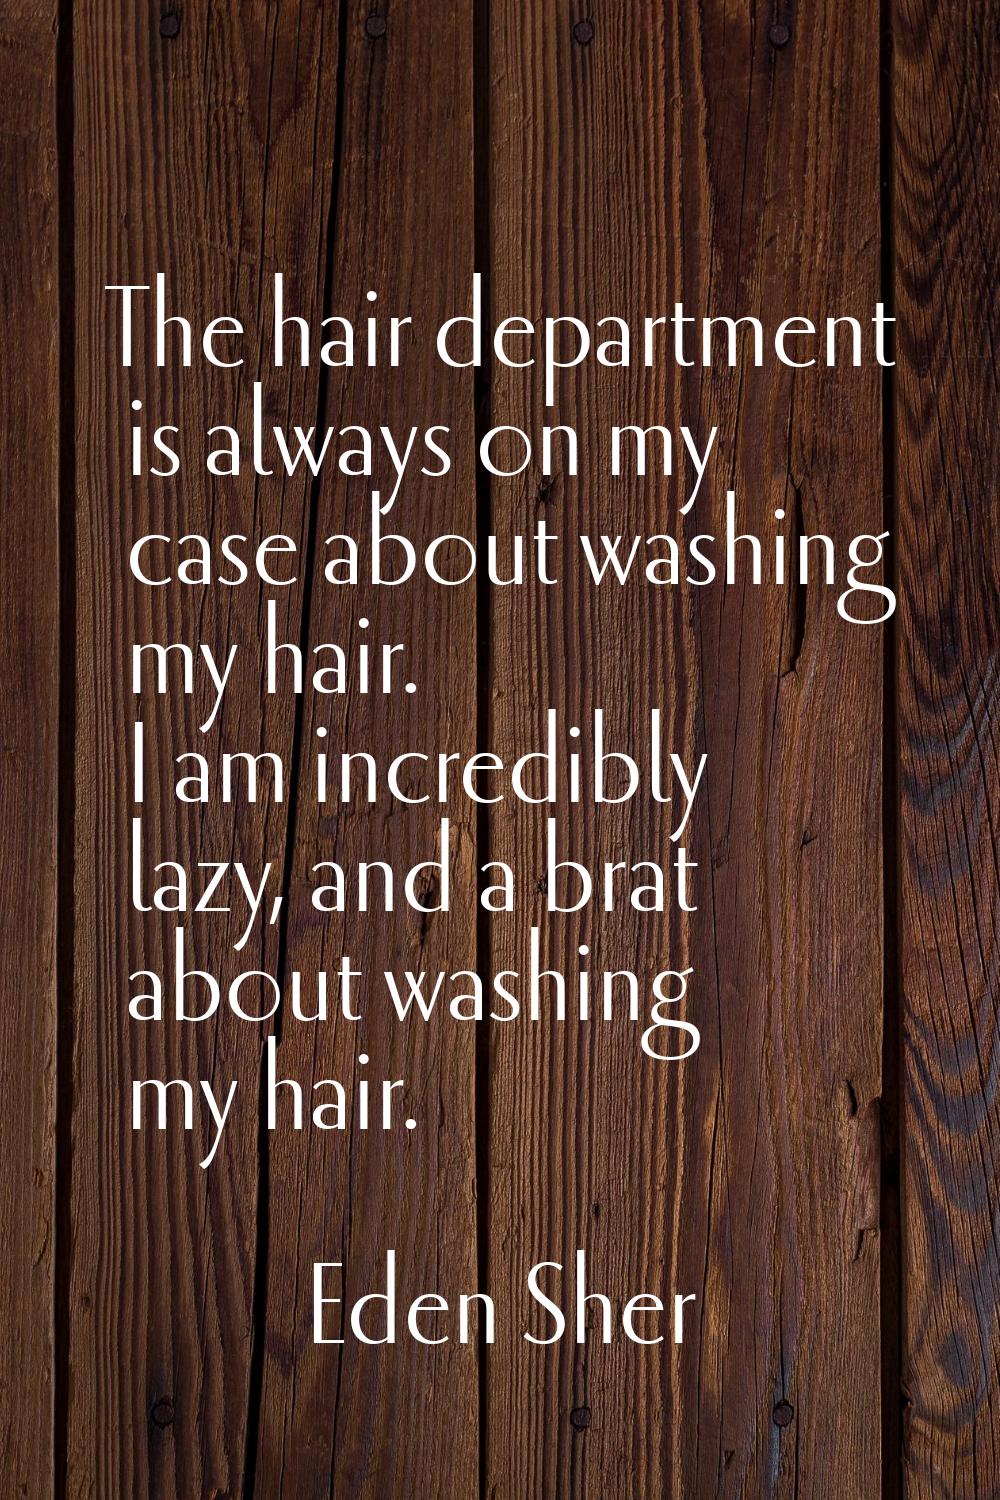 The hair department is always on my case about washing my hair. I am incredibly lazy, and a brat ab